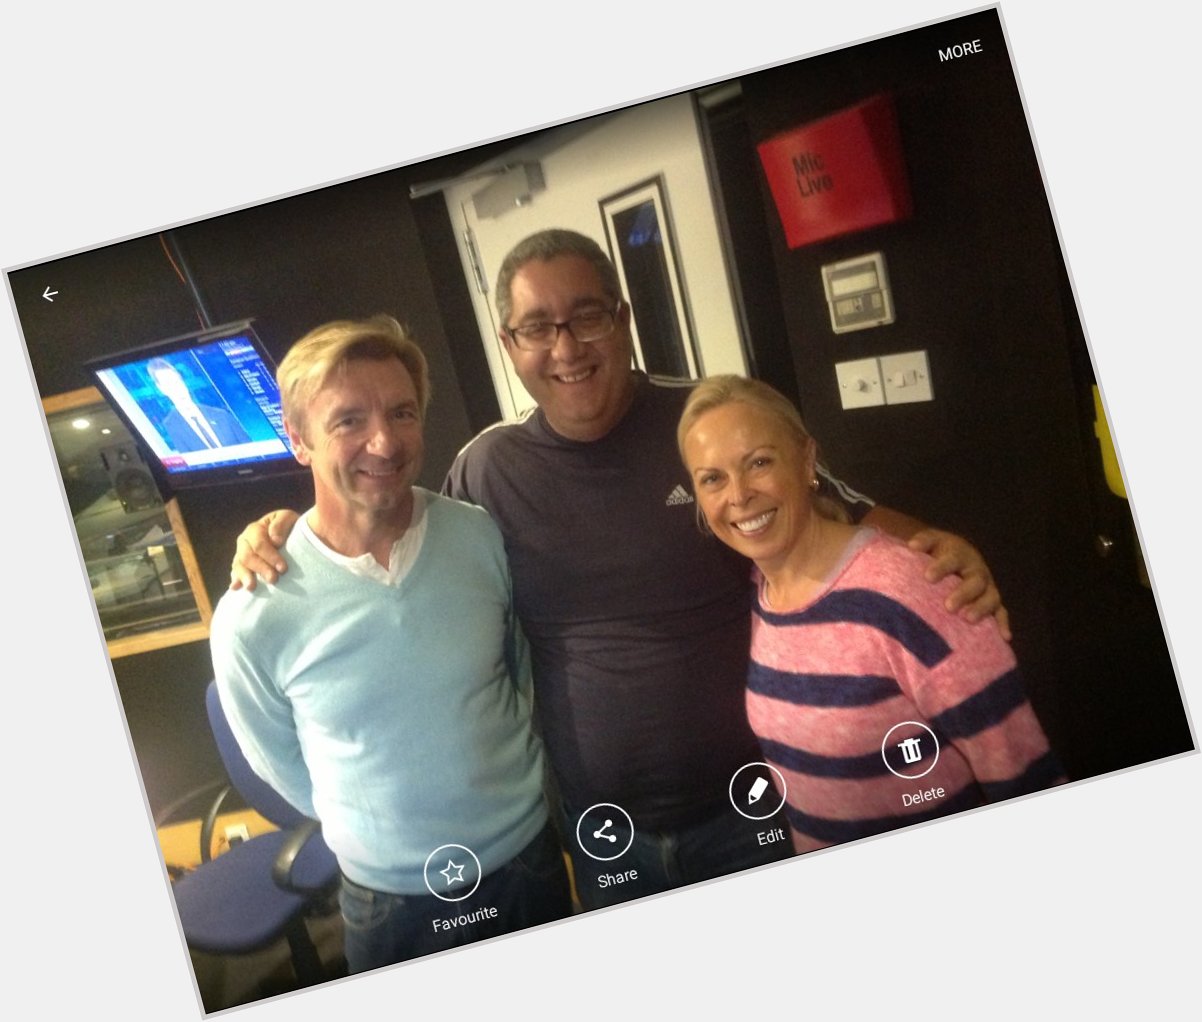 Happy Birthday to Jayne Torvill (right) have a good day my friend 